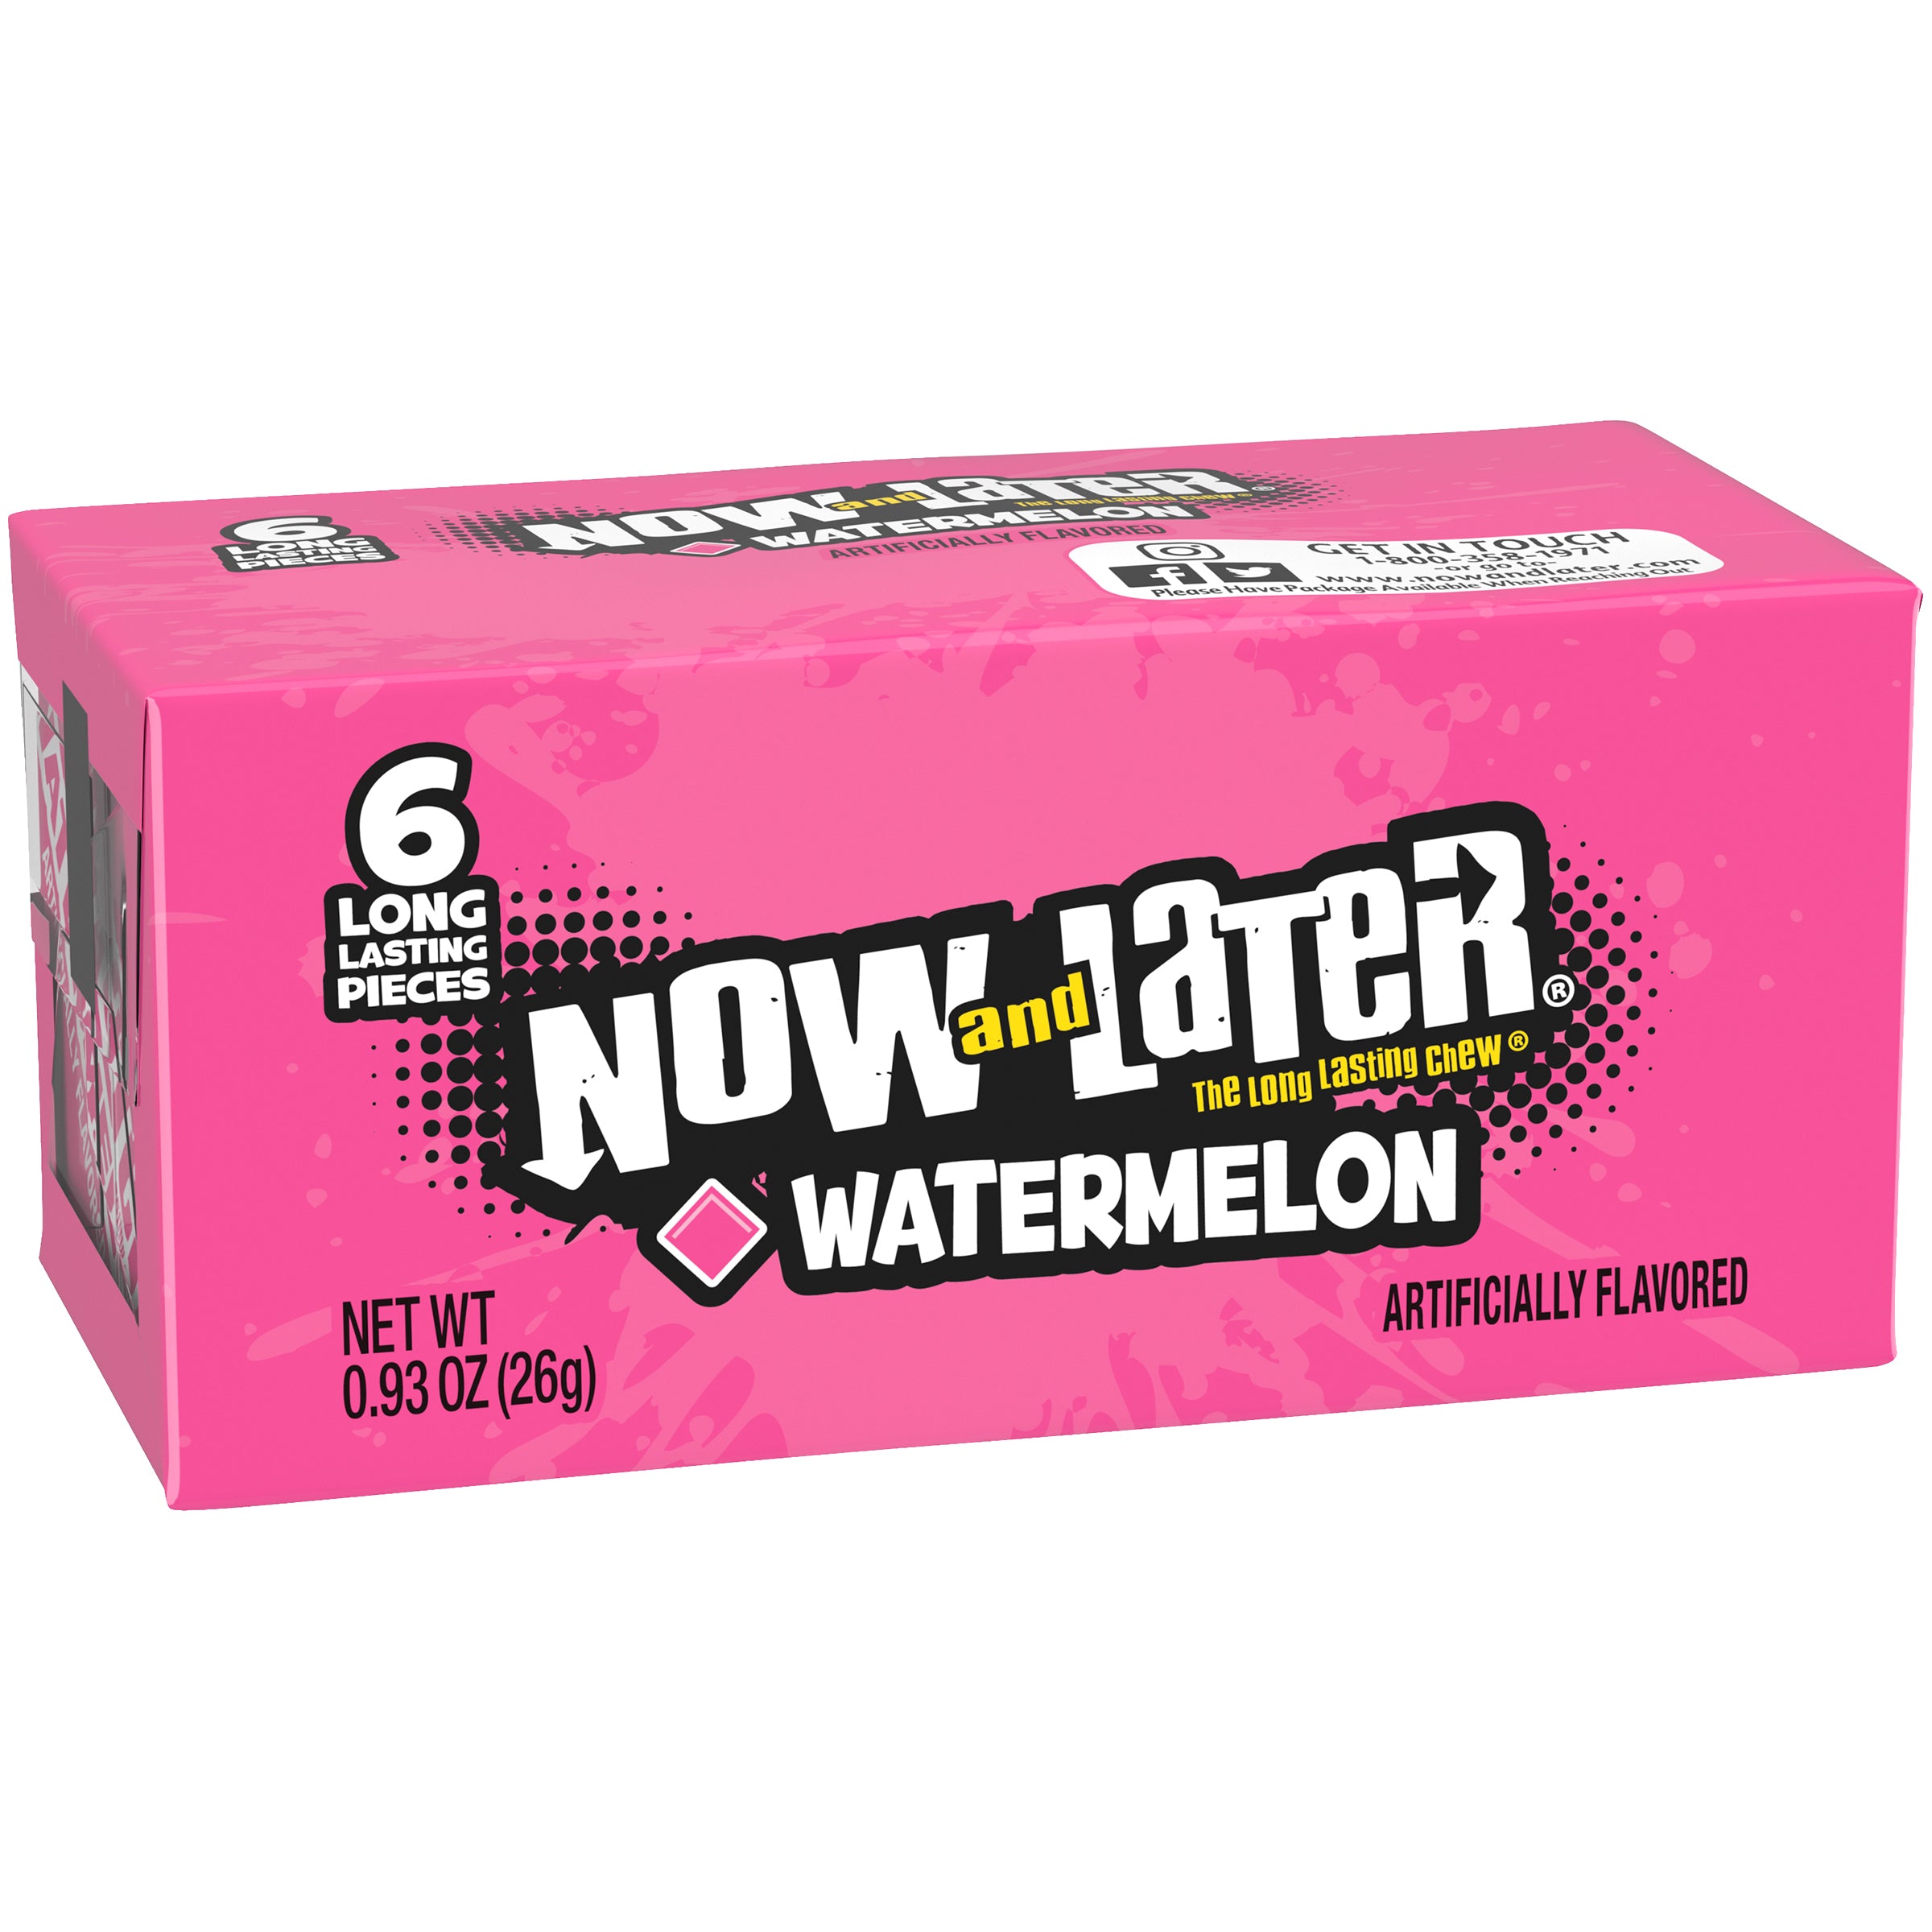 NOW AND LATER - WATERMELON